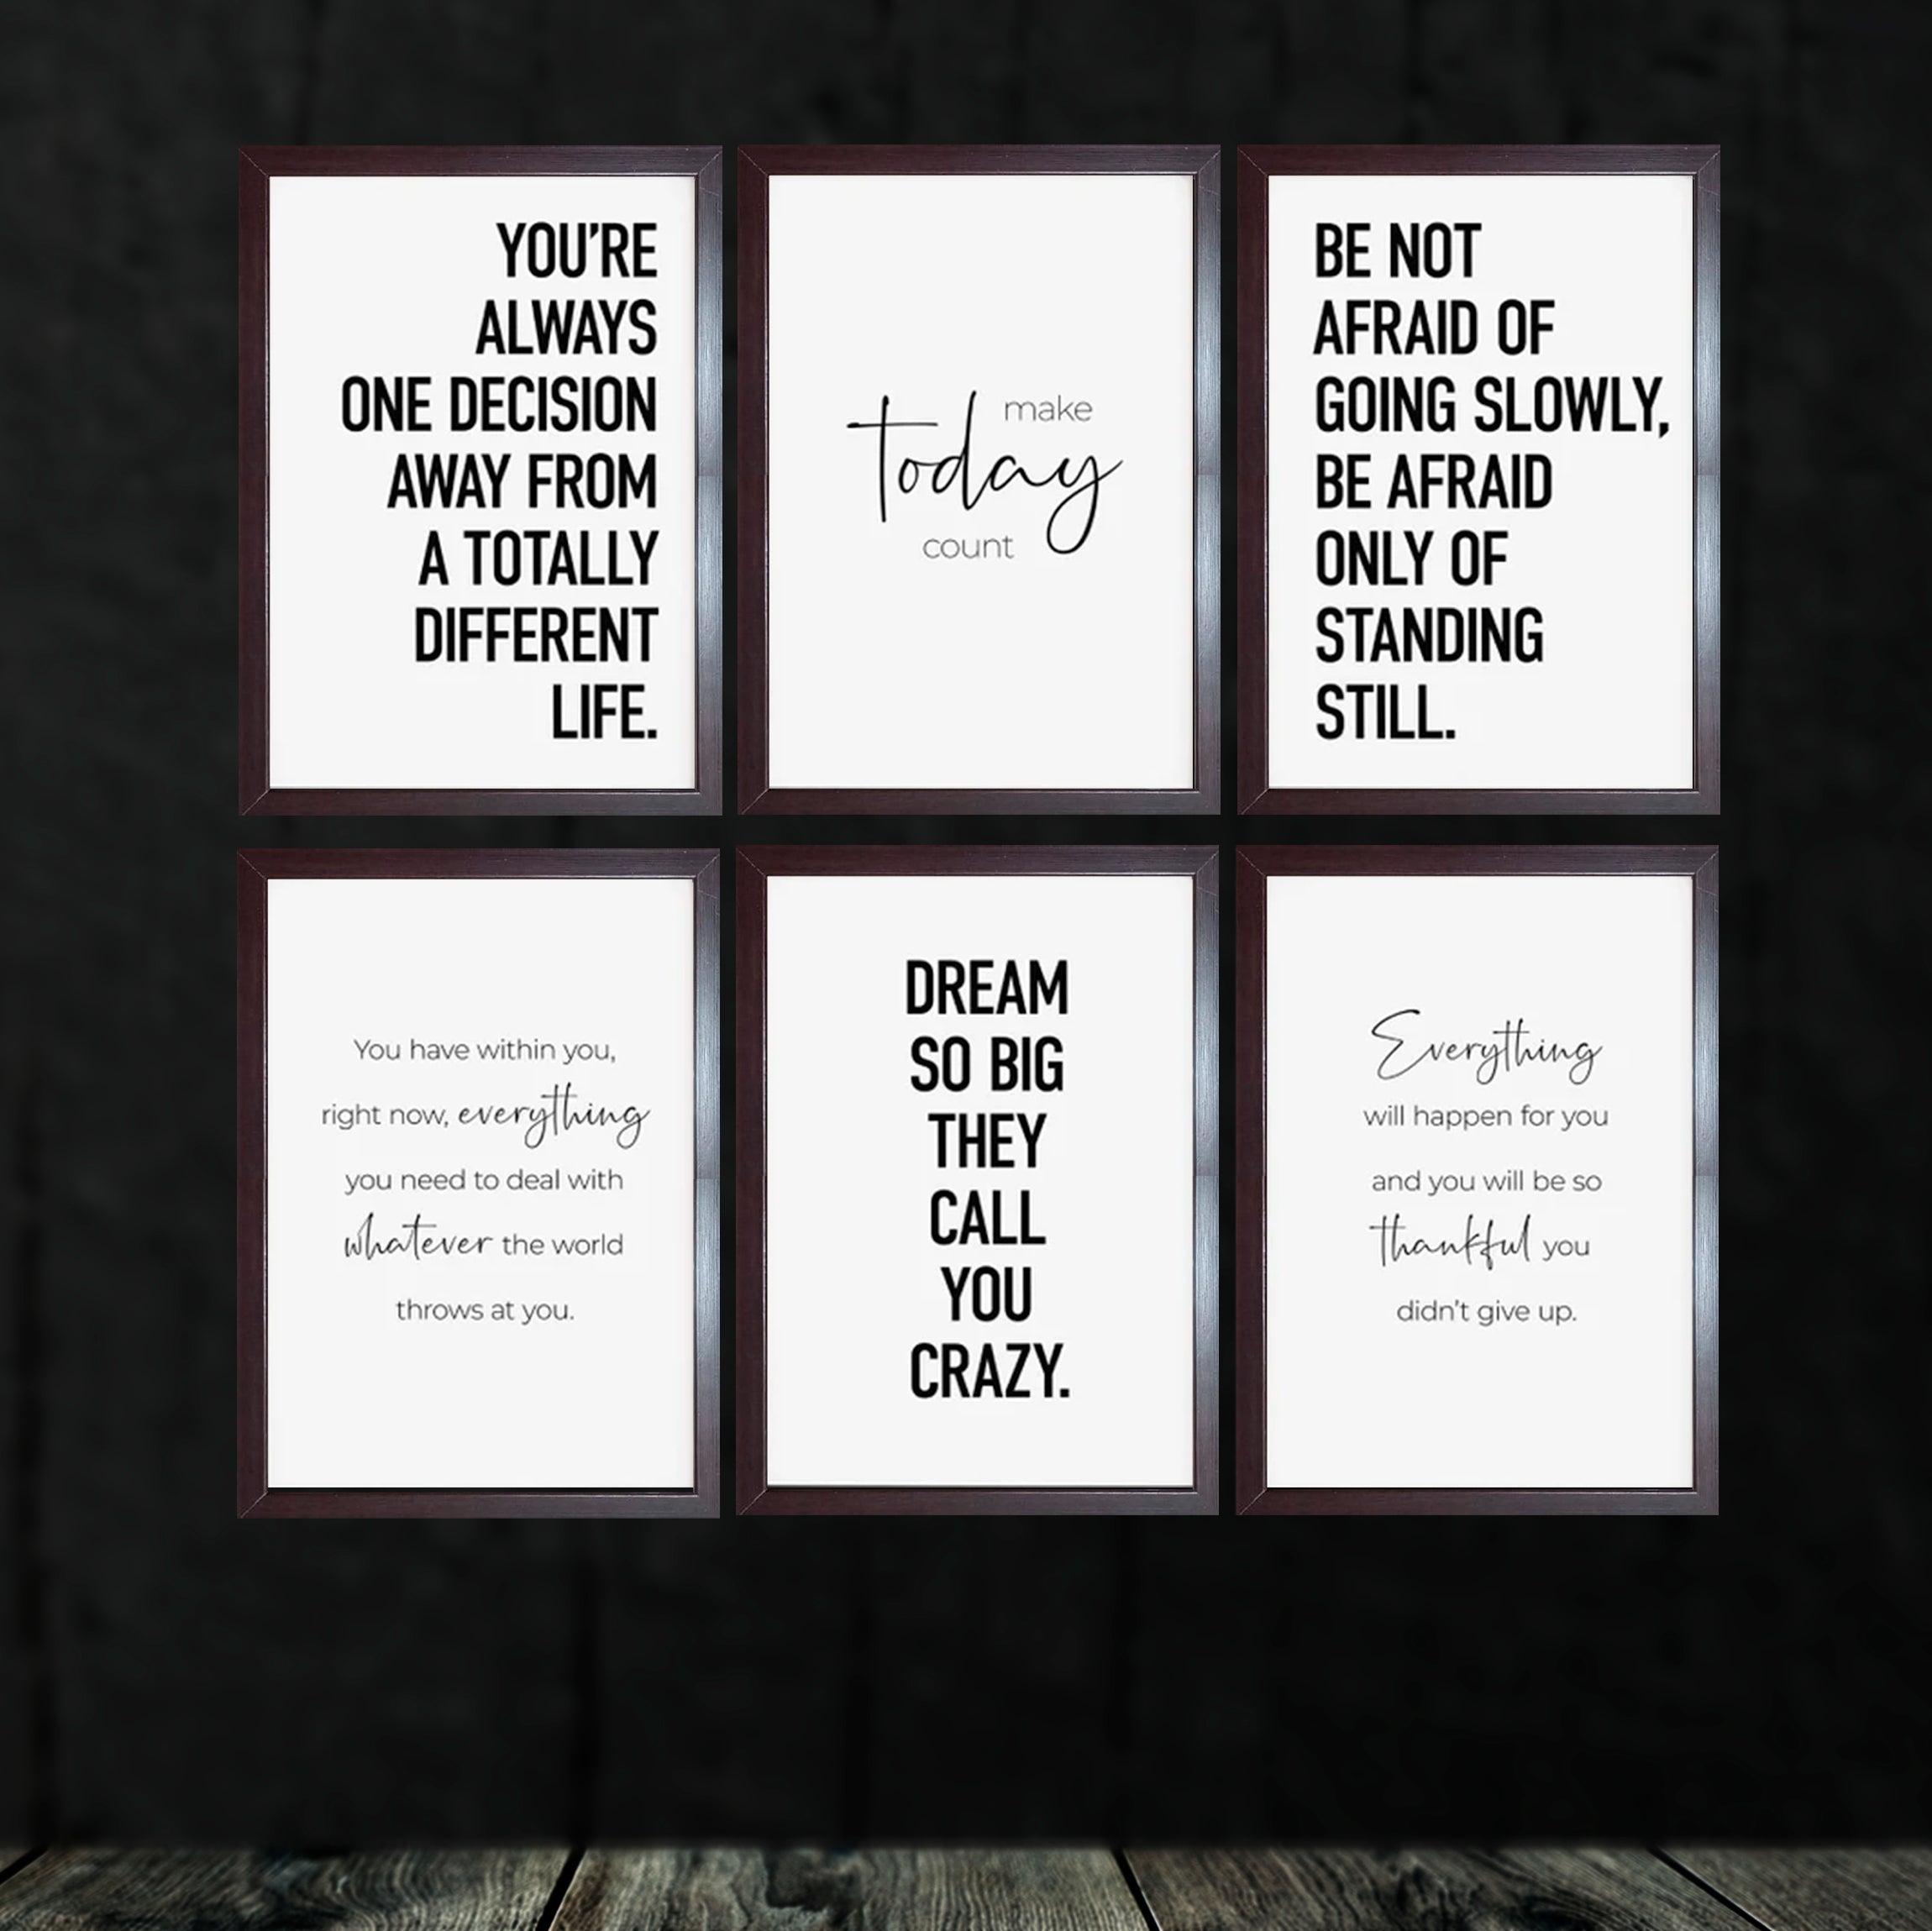 Work Motivational Qoutes For Office / Companies Set of 6 frames - 0